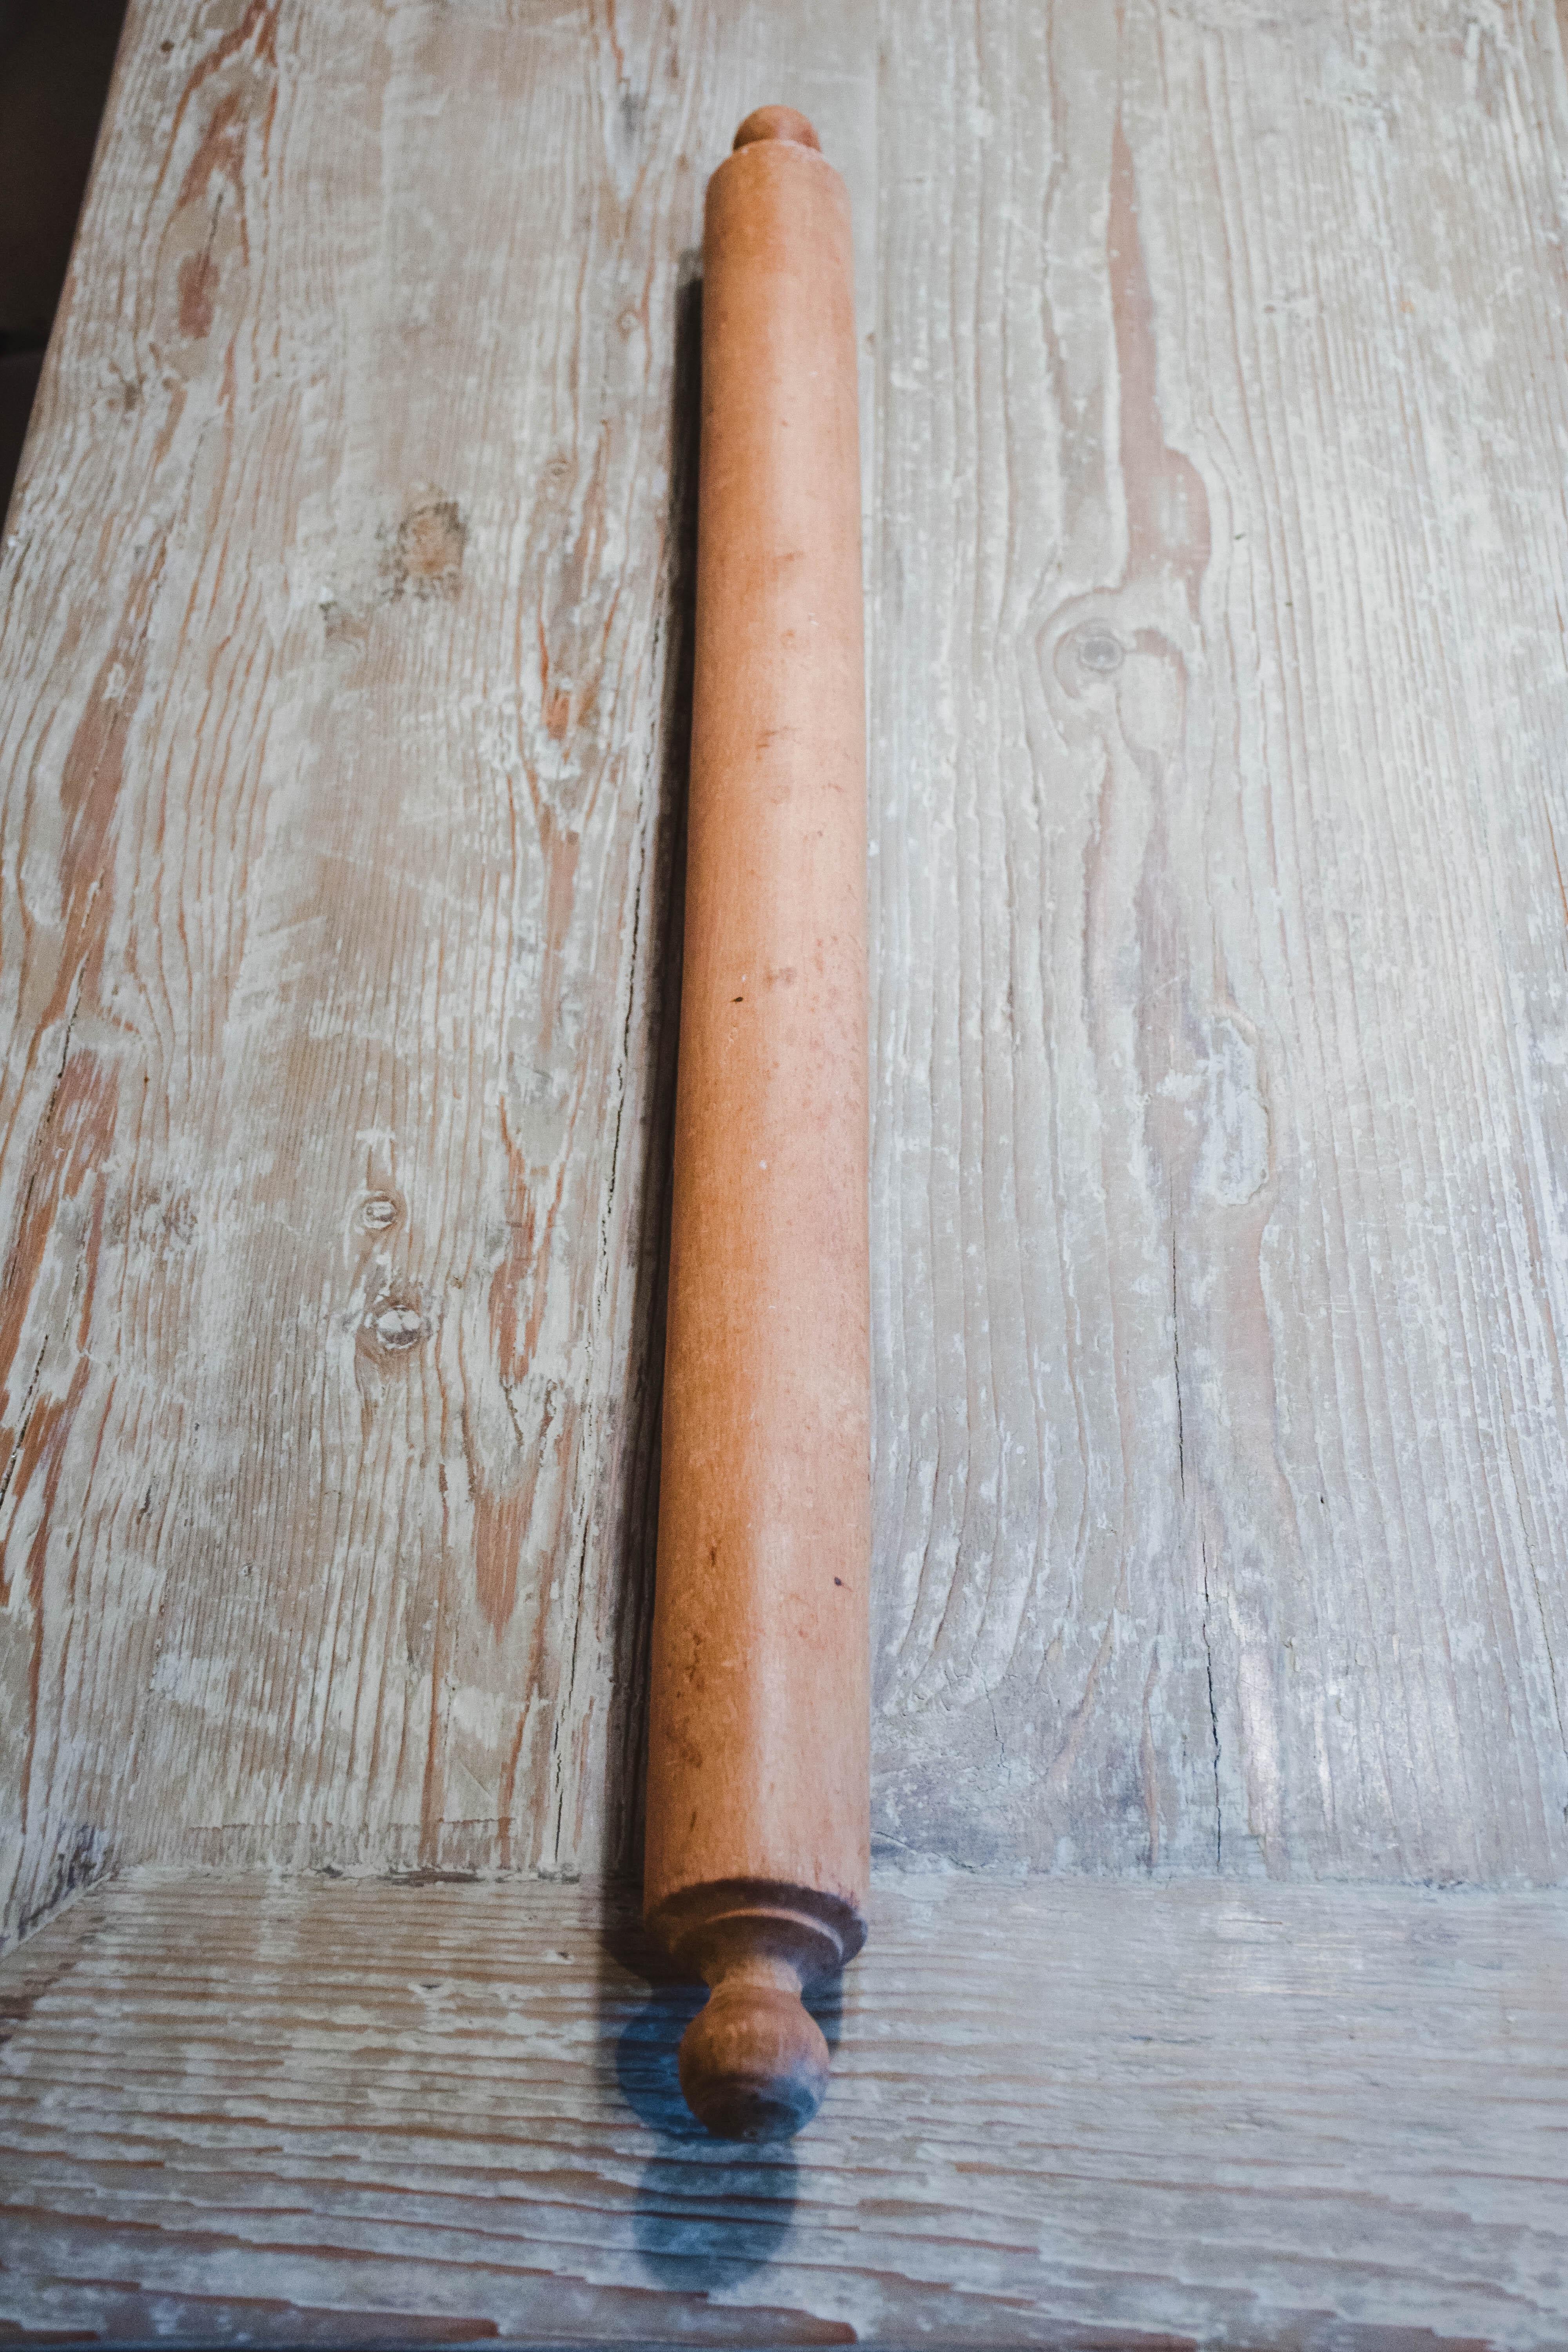 This vintage rolling pin was likely used to make cookies, pies or pasta. The wood pin is in good condition and has a nice patina.